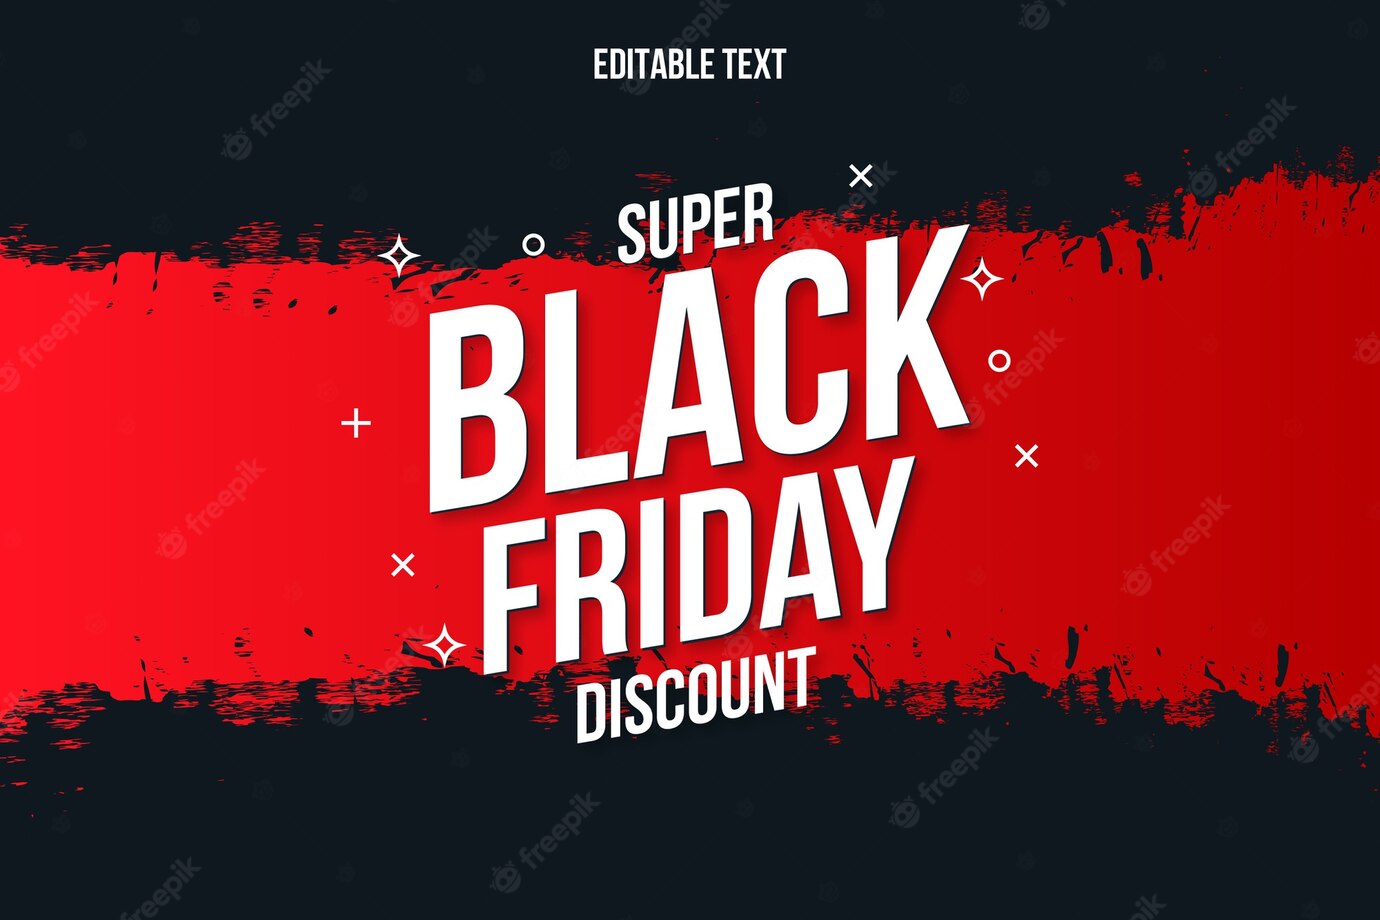 Super Black Friday Discount Banner With Red Brush Stroke 1361 2941